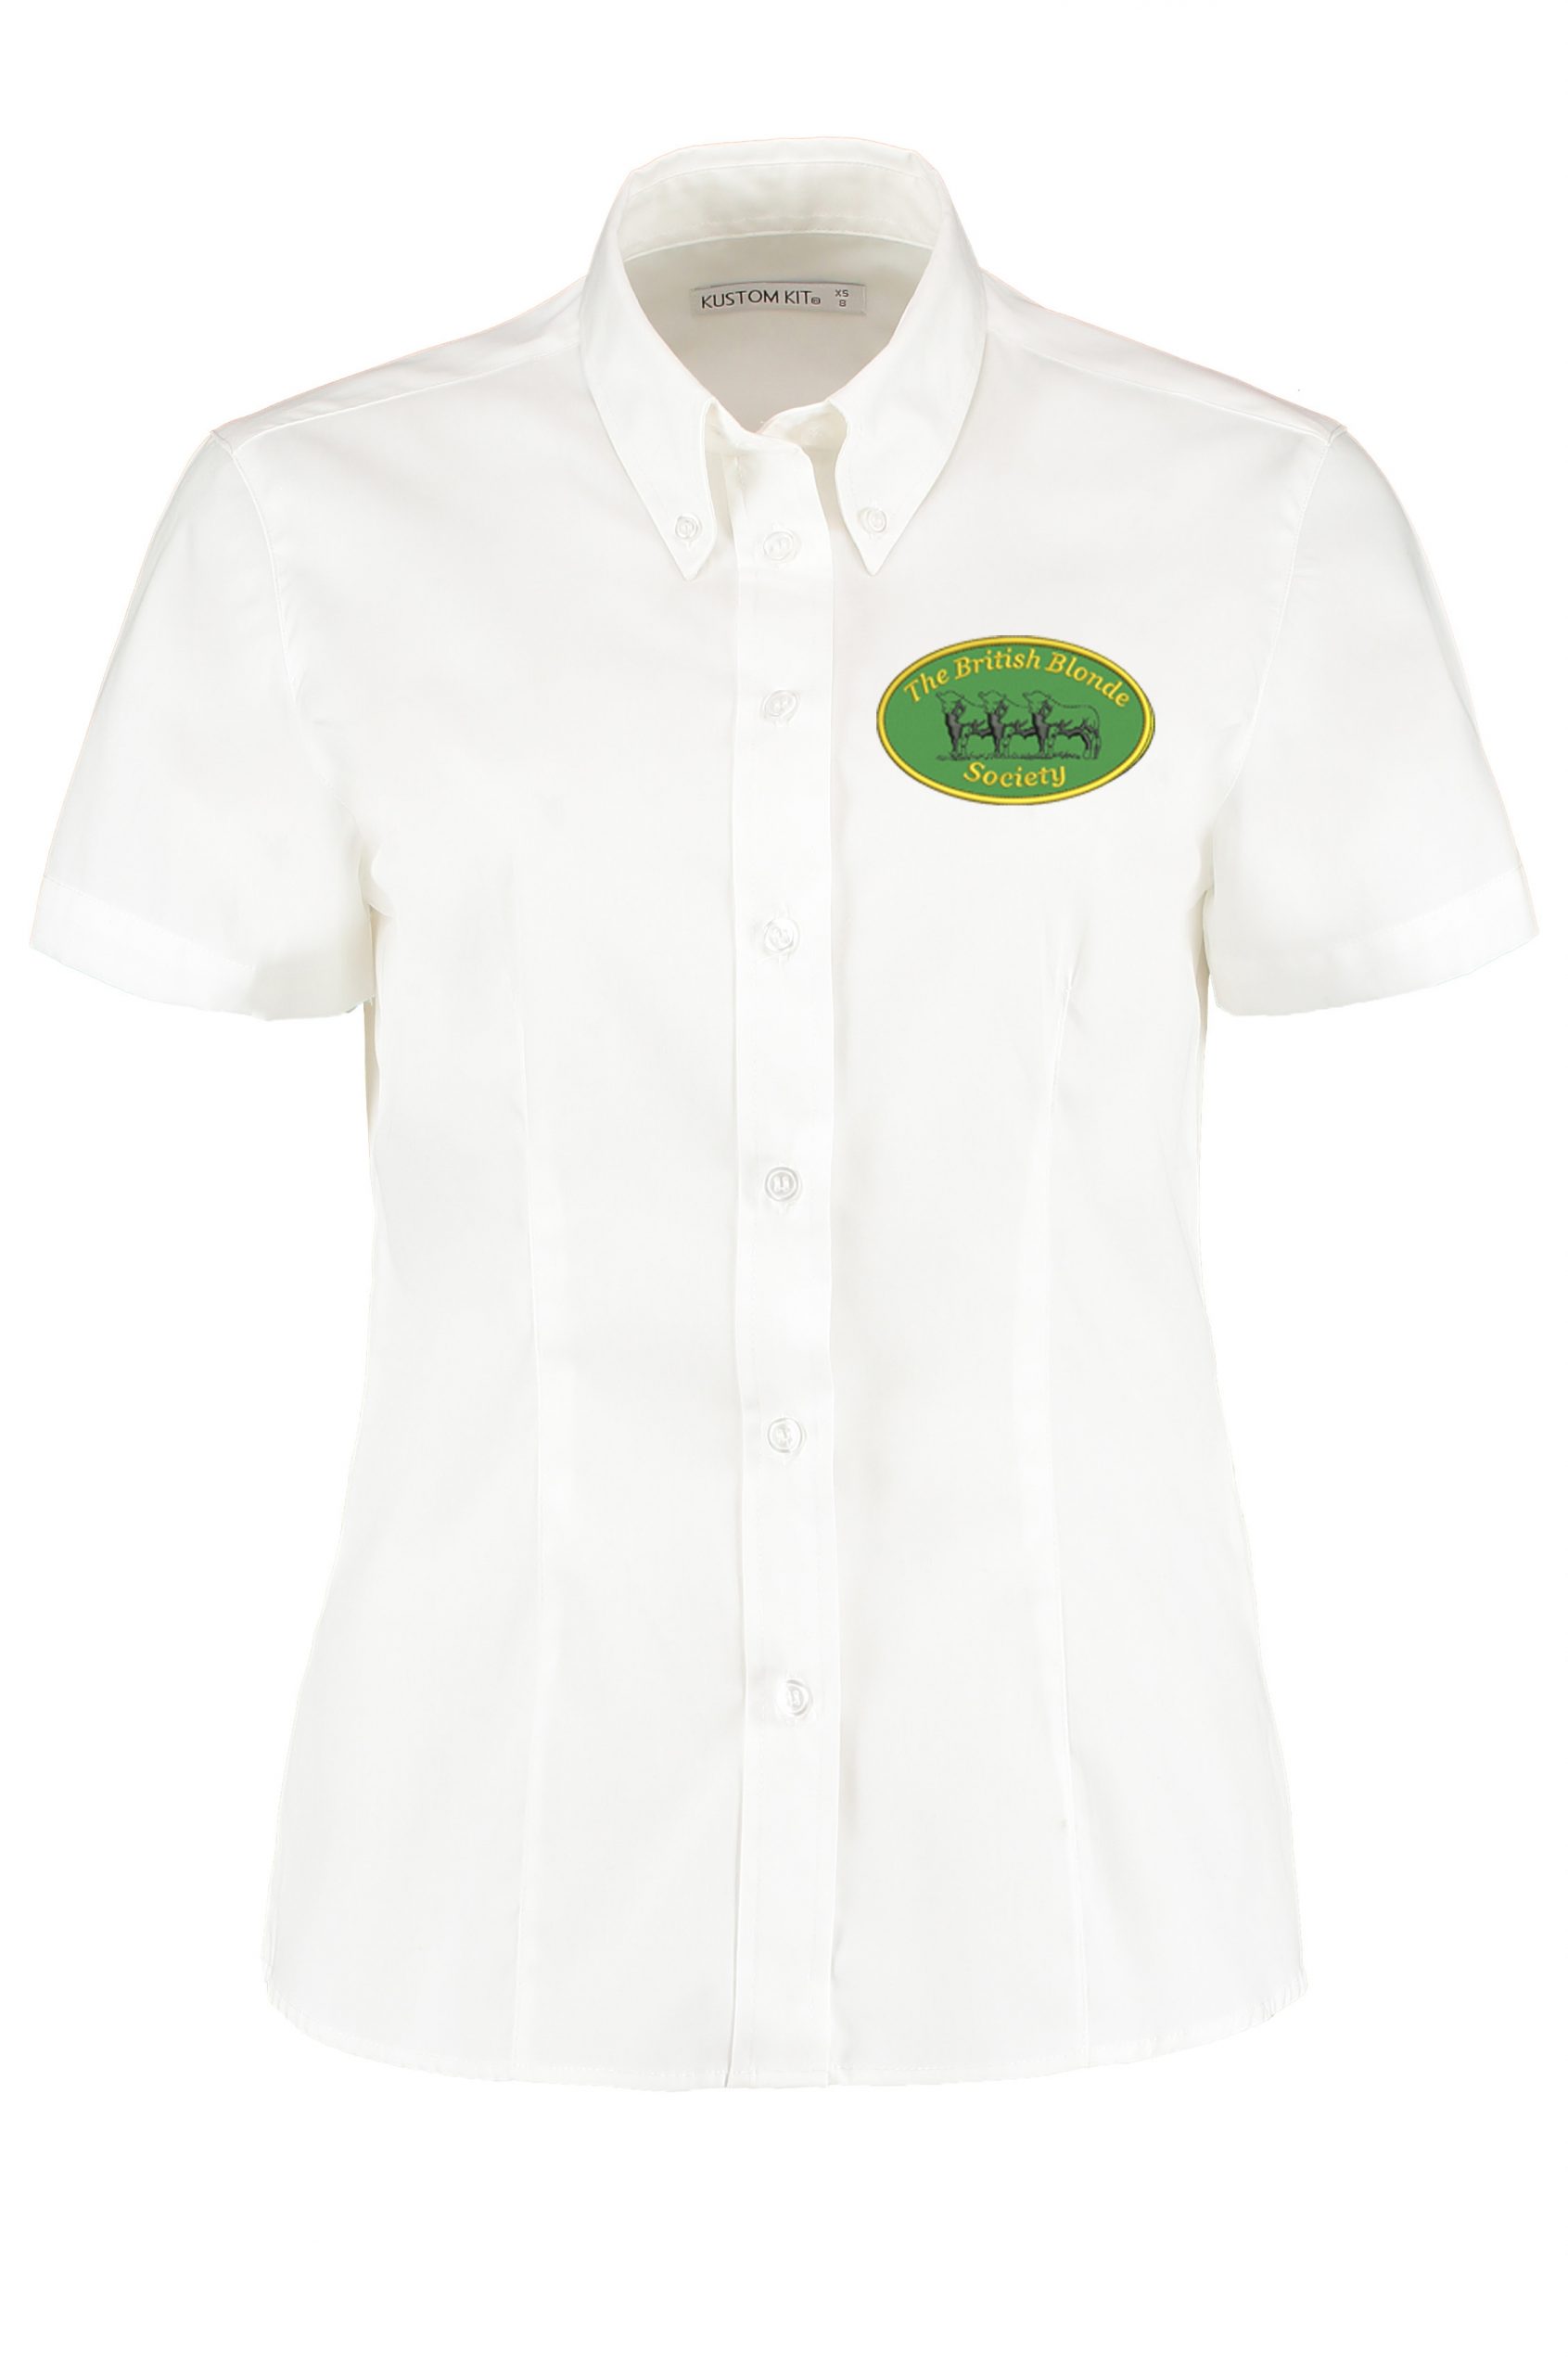 products-bb_ladies_ss_shirt_kk701-recovered-scaled